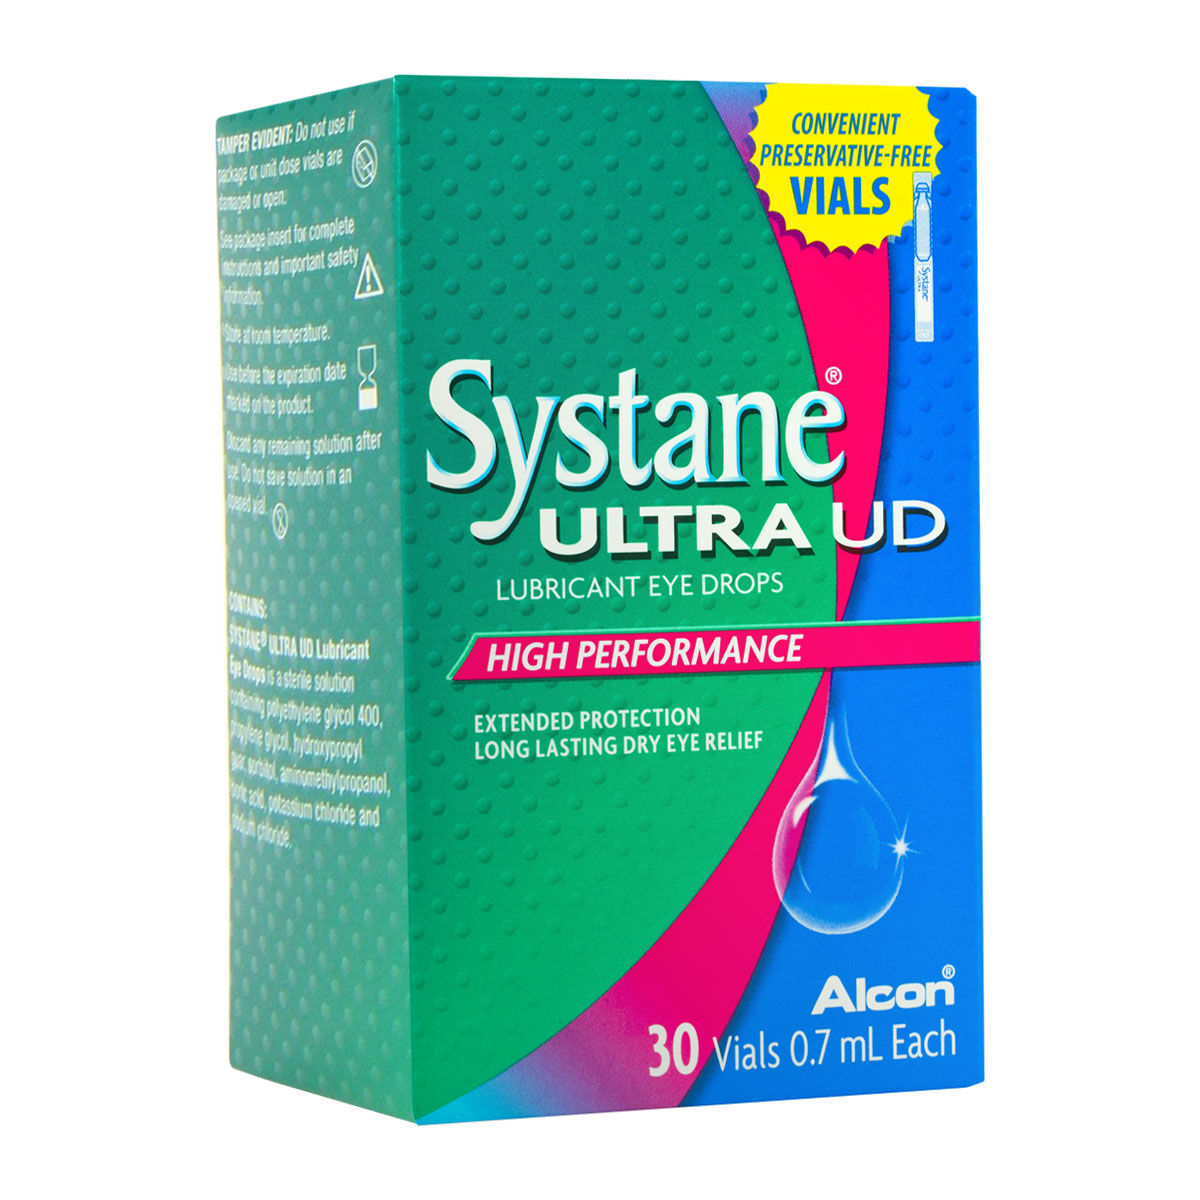 Alcon Systane Ultra Eye Drops - Vials  (30 x 0.7ml), For Use With Soft Contact Lenses